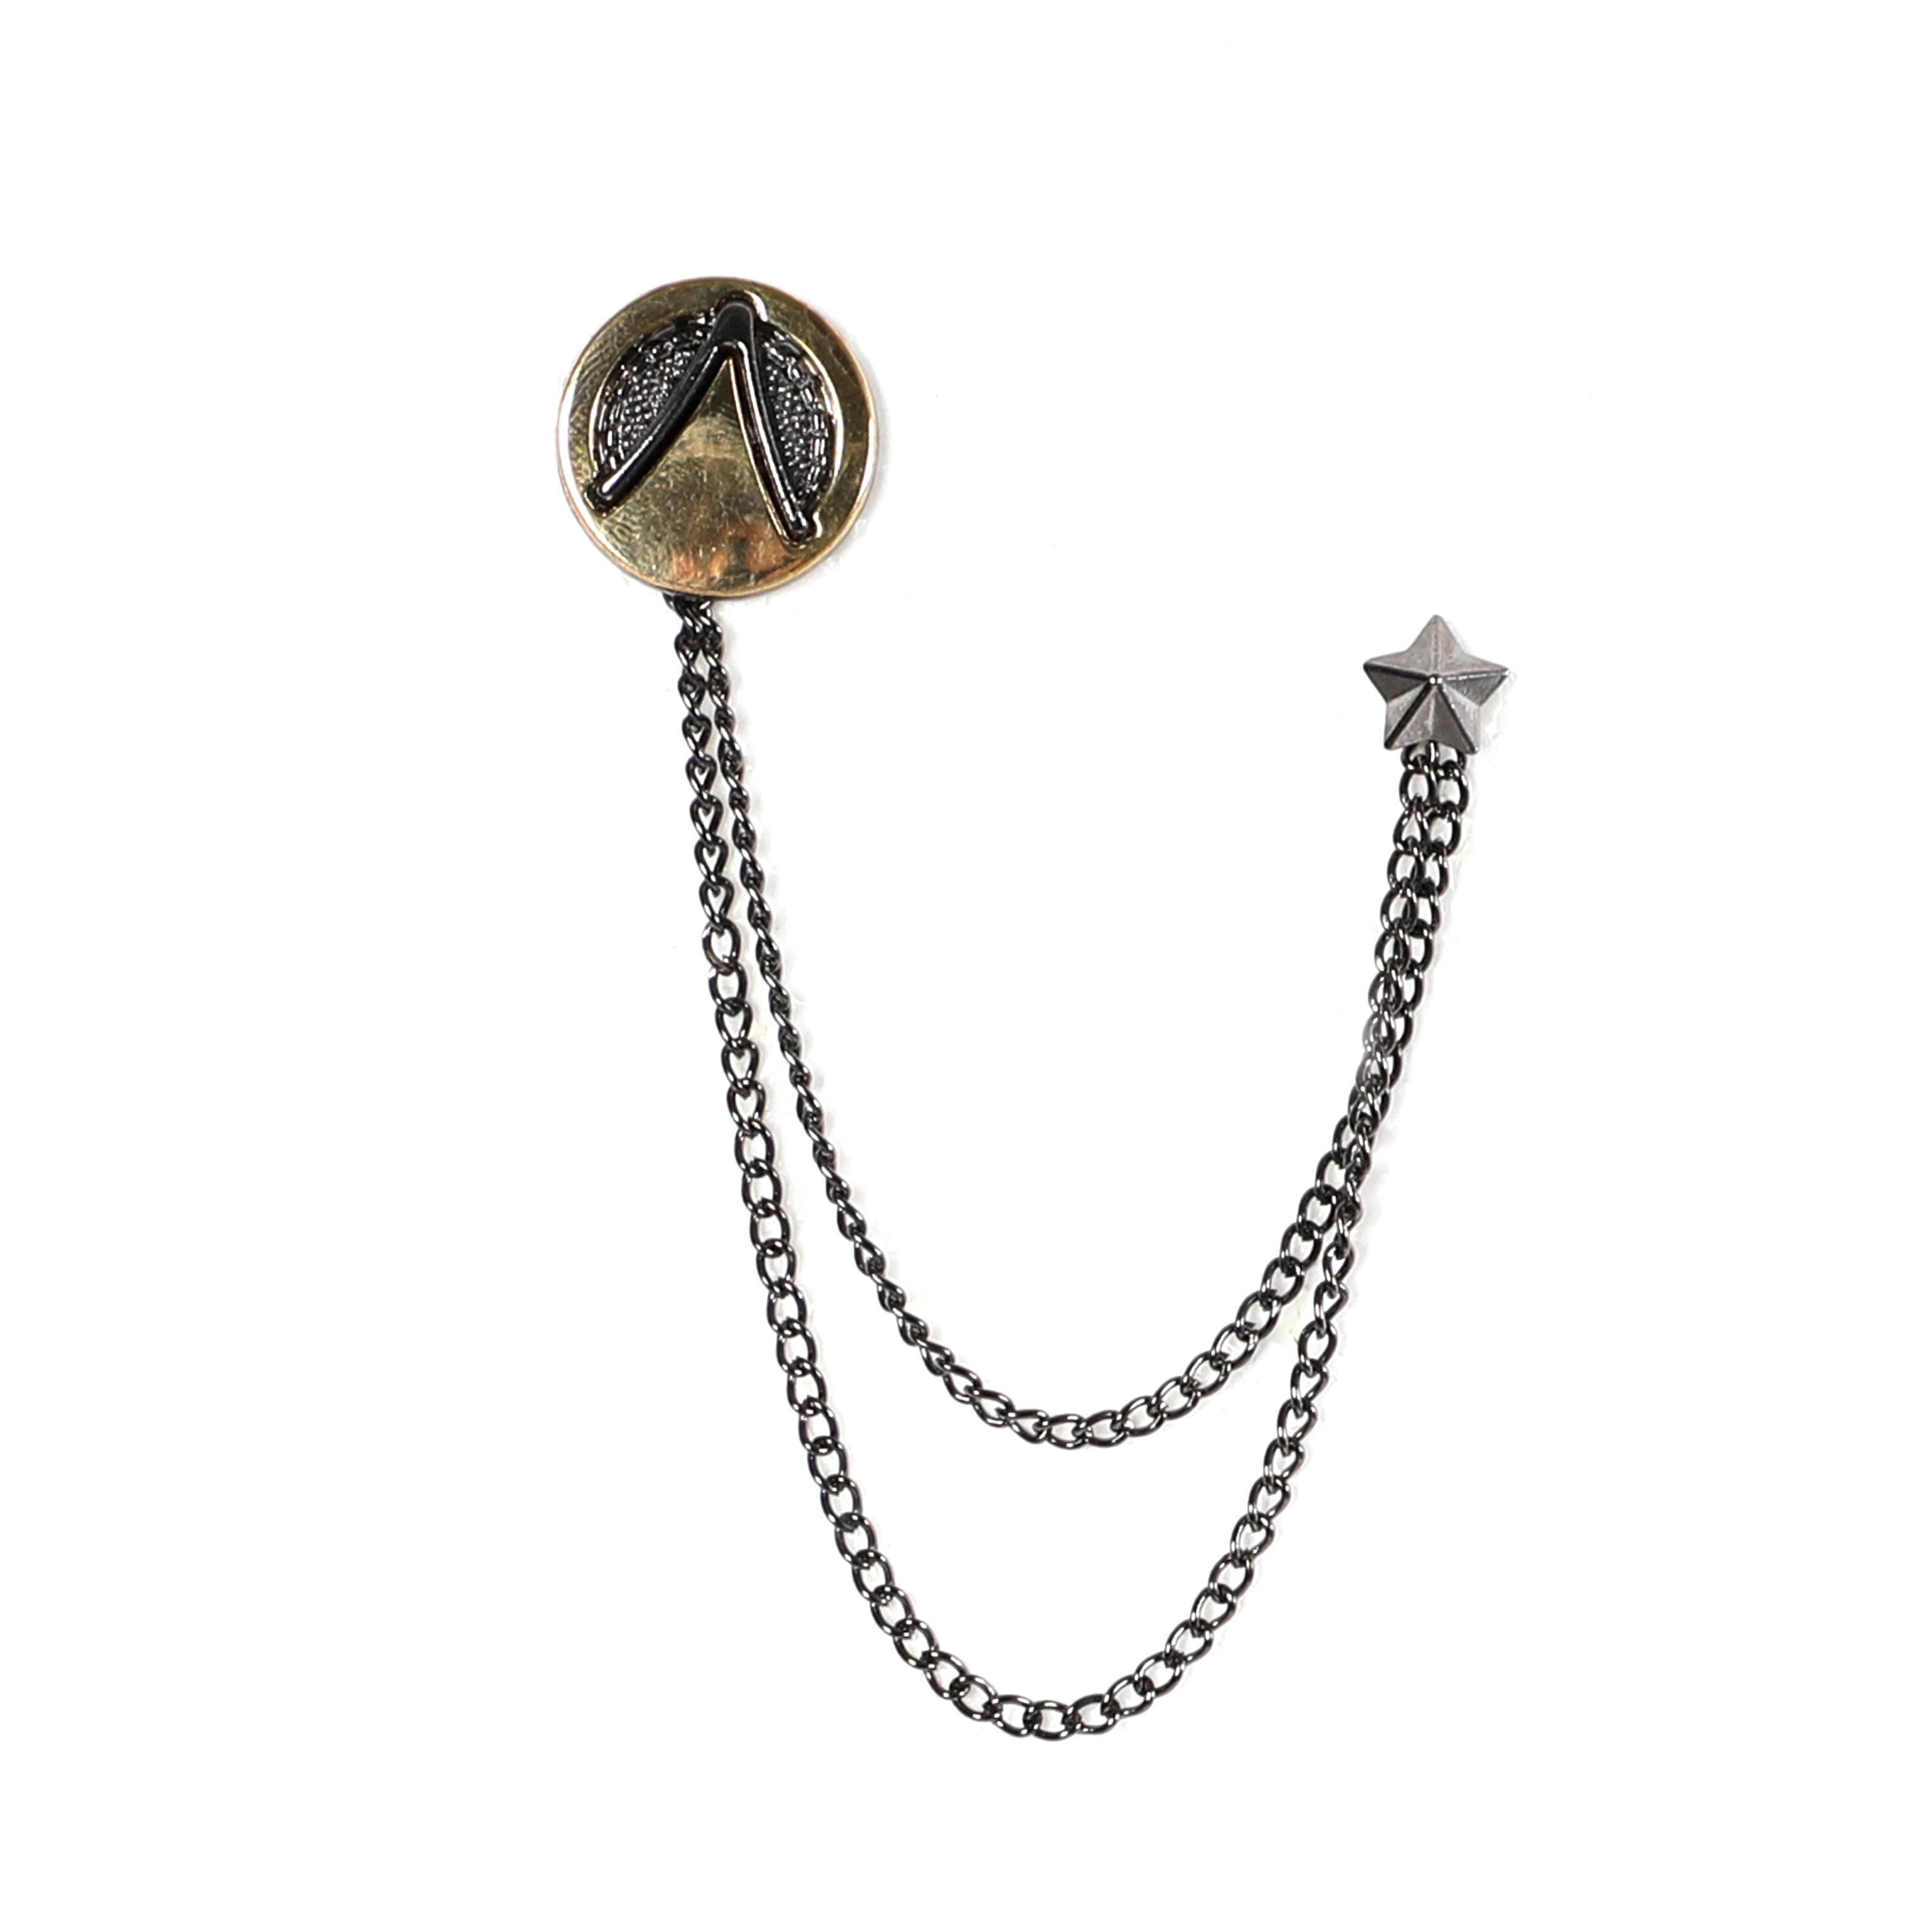 Men Silver Chained Pin With Golden Medal Design